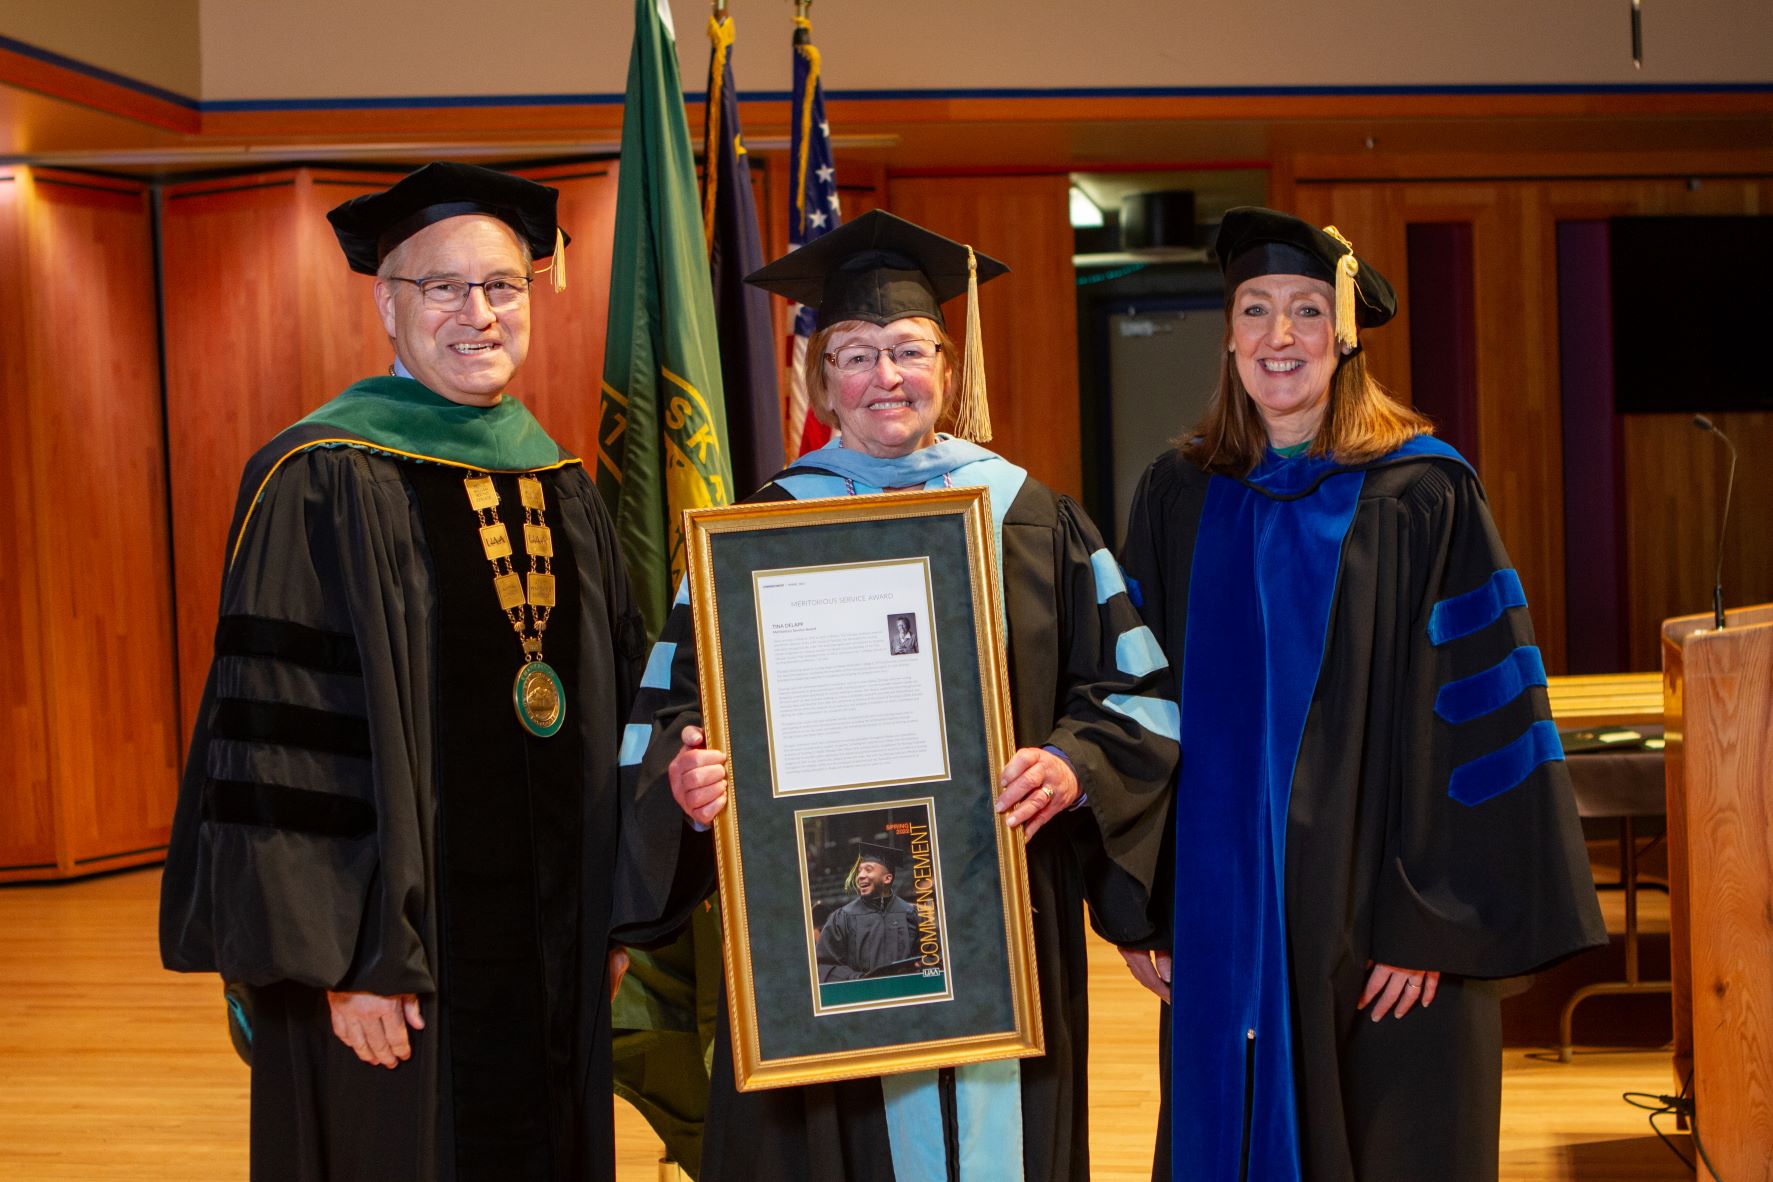 Tina DeLapp holding award and standing with Chancellor Parnell and Provost Runge